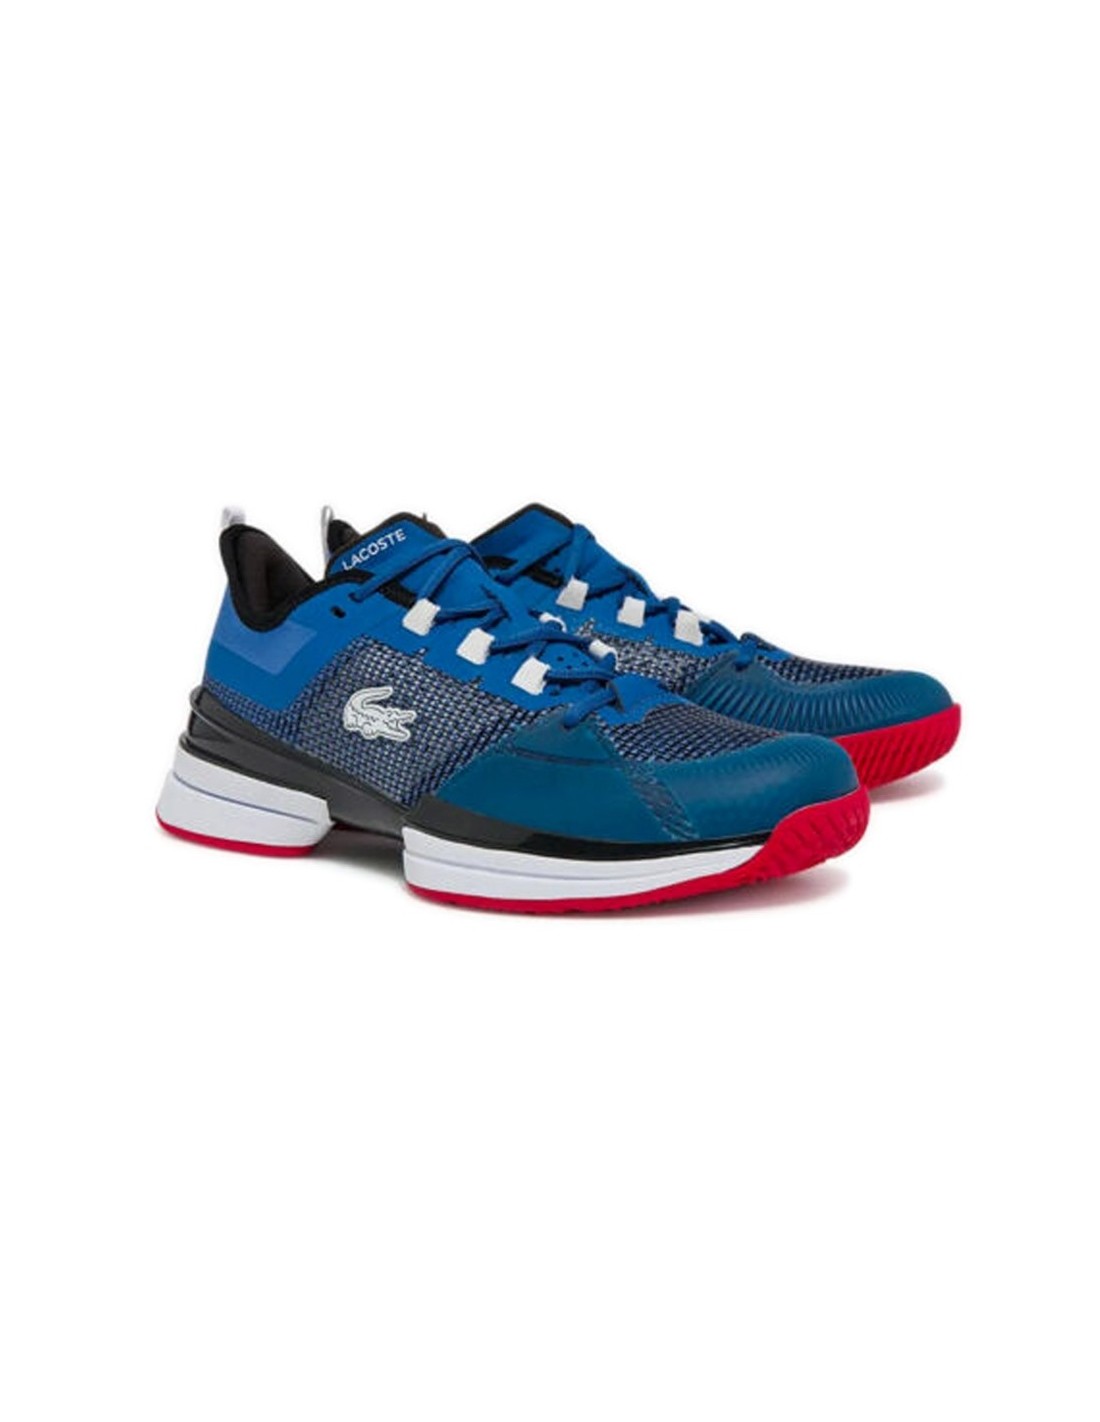 Lacoste AG-LT ULTRA 430010221 Lacoste Paddle Shoes